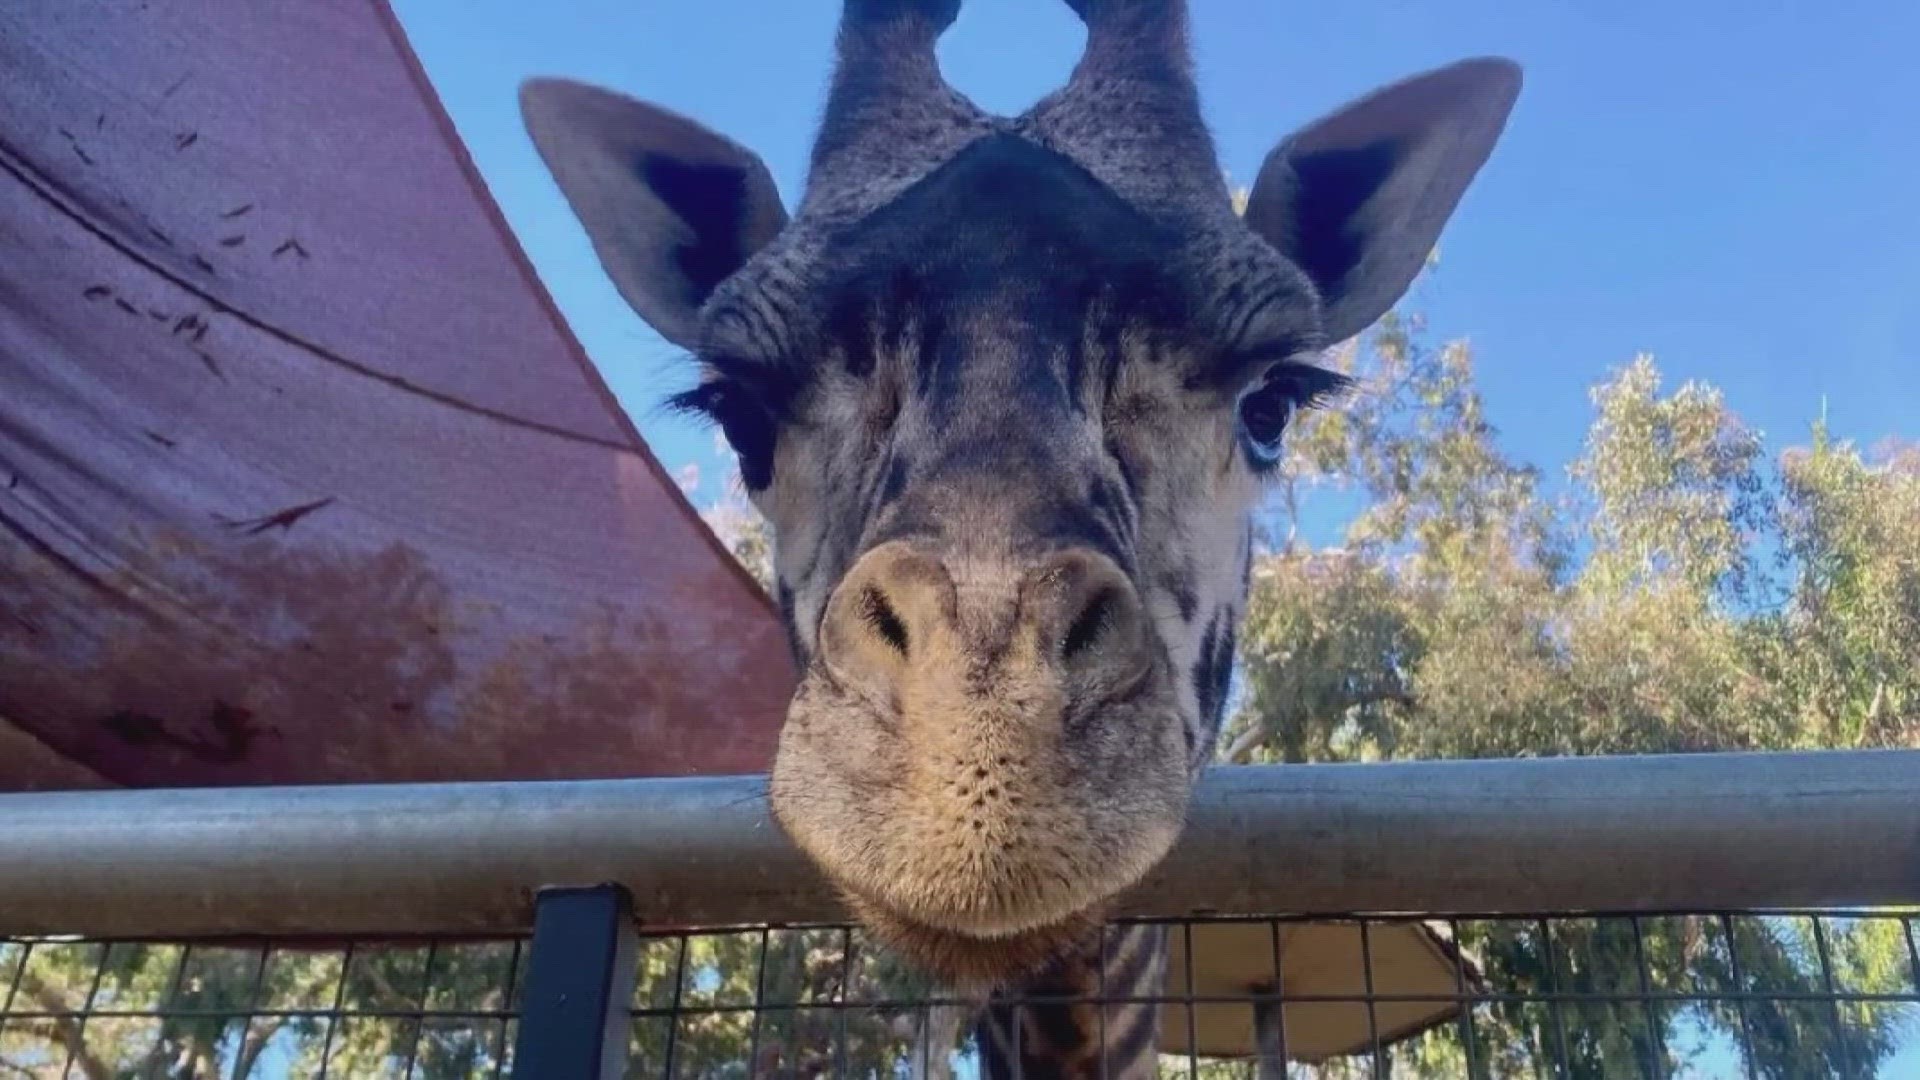 Eleanor will be quarantined for at least 30 days. When it ends, she will then be introduced to Dane and Jenny, a reticulated giraffe who shares the habitat.